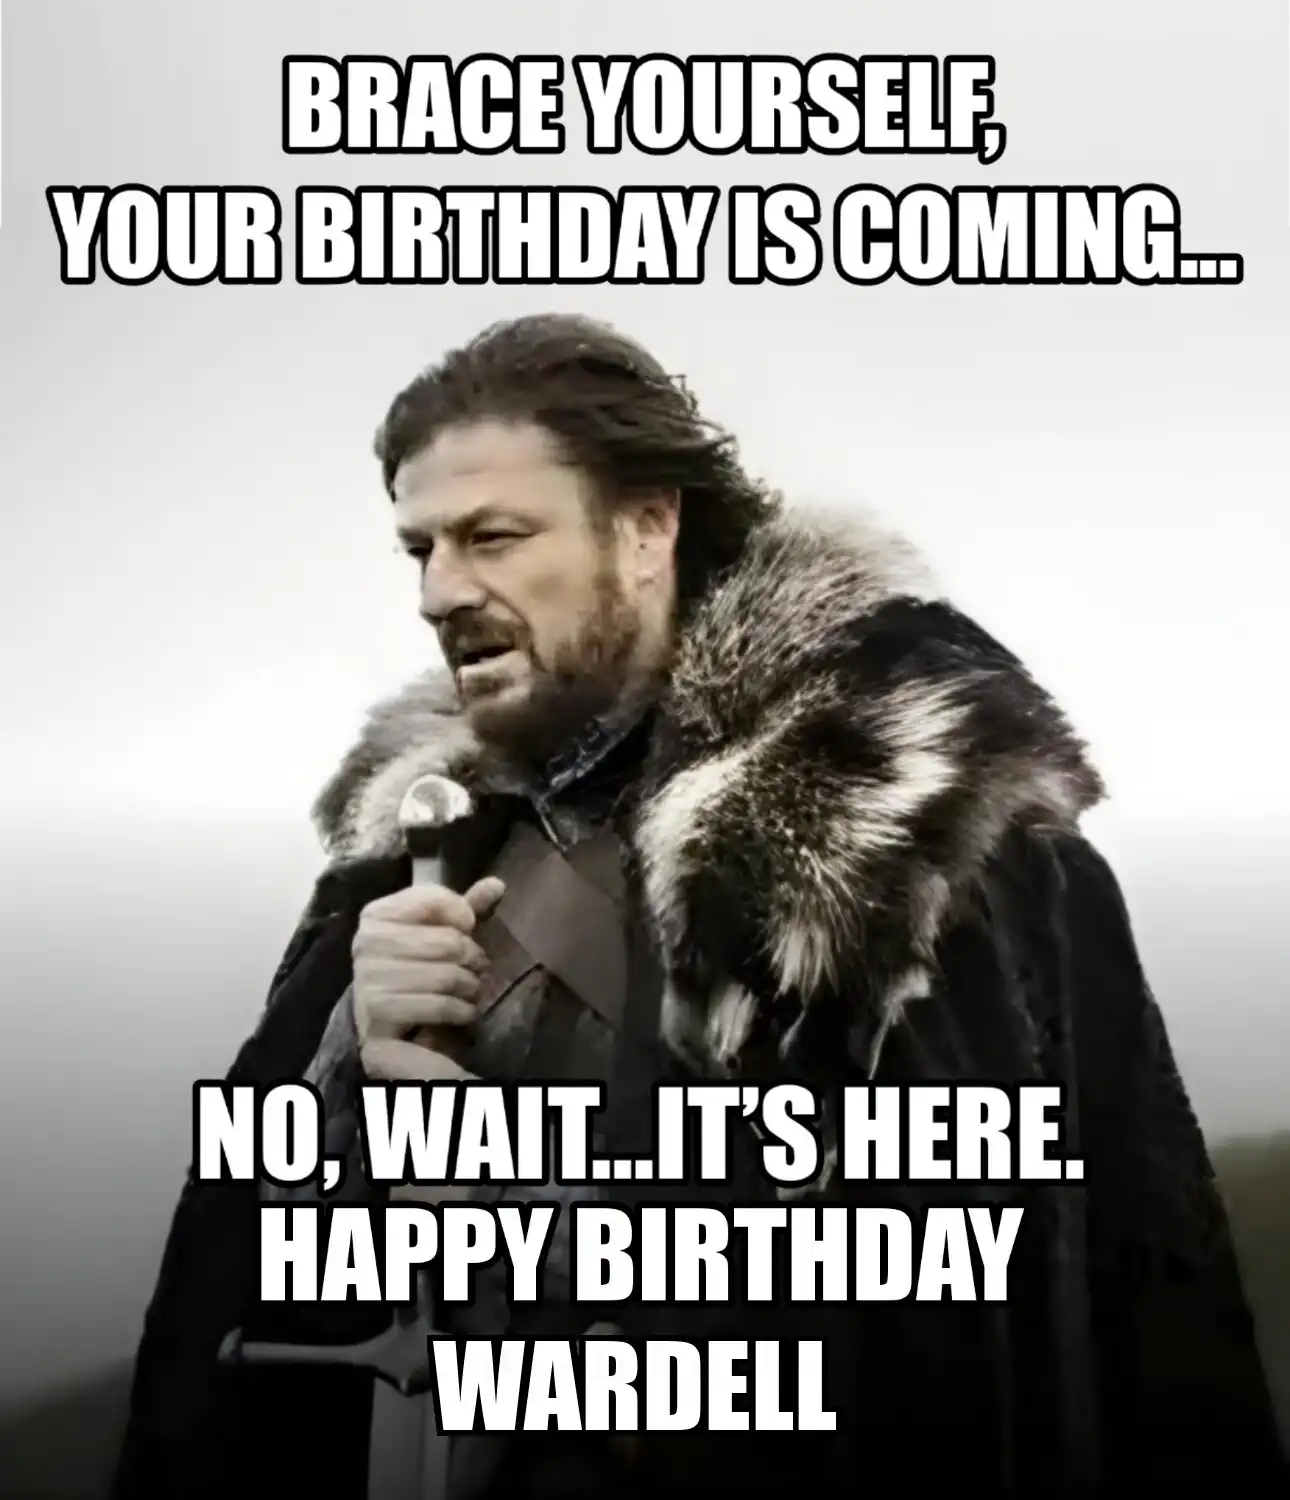 Happy Birthday Wardell Brace Yourself Your Birthday Is Coming Meme